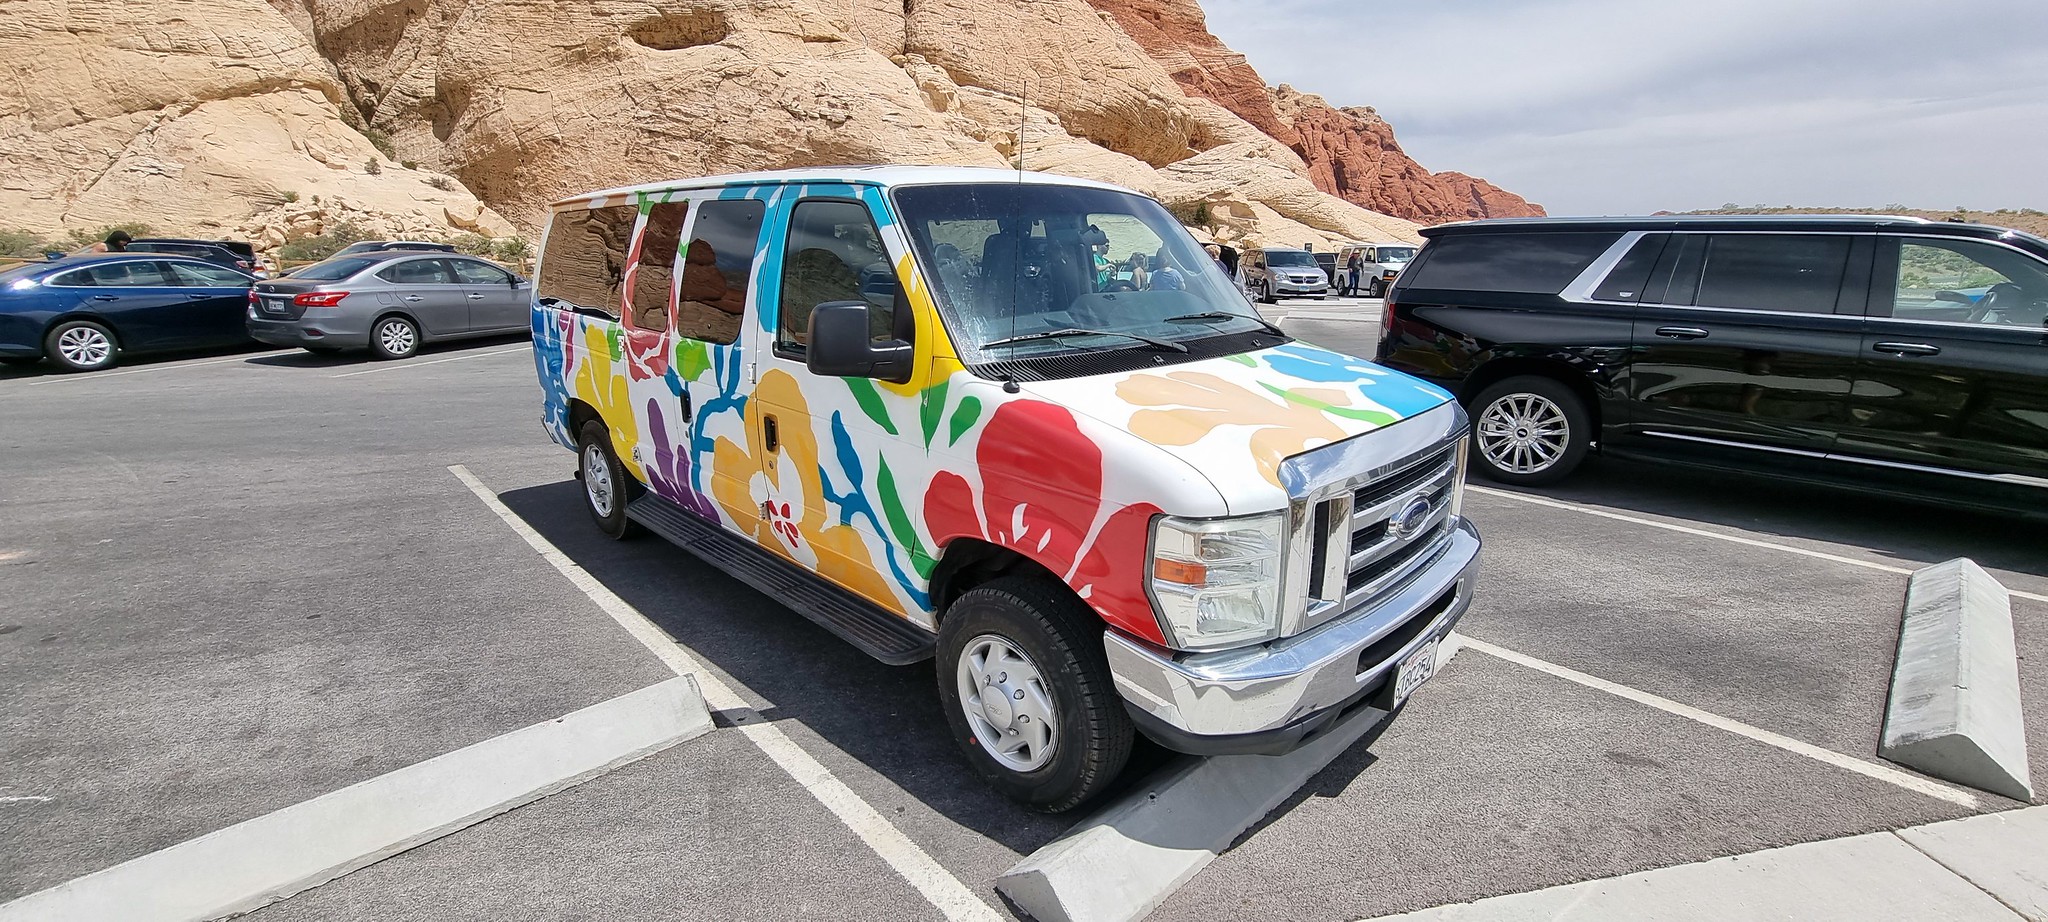 A funky looking van seen at Red Rock Canyon near Las Vegas